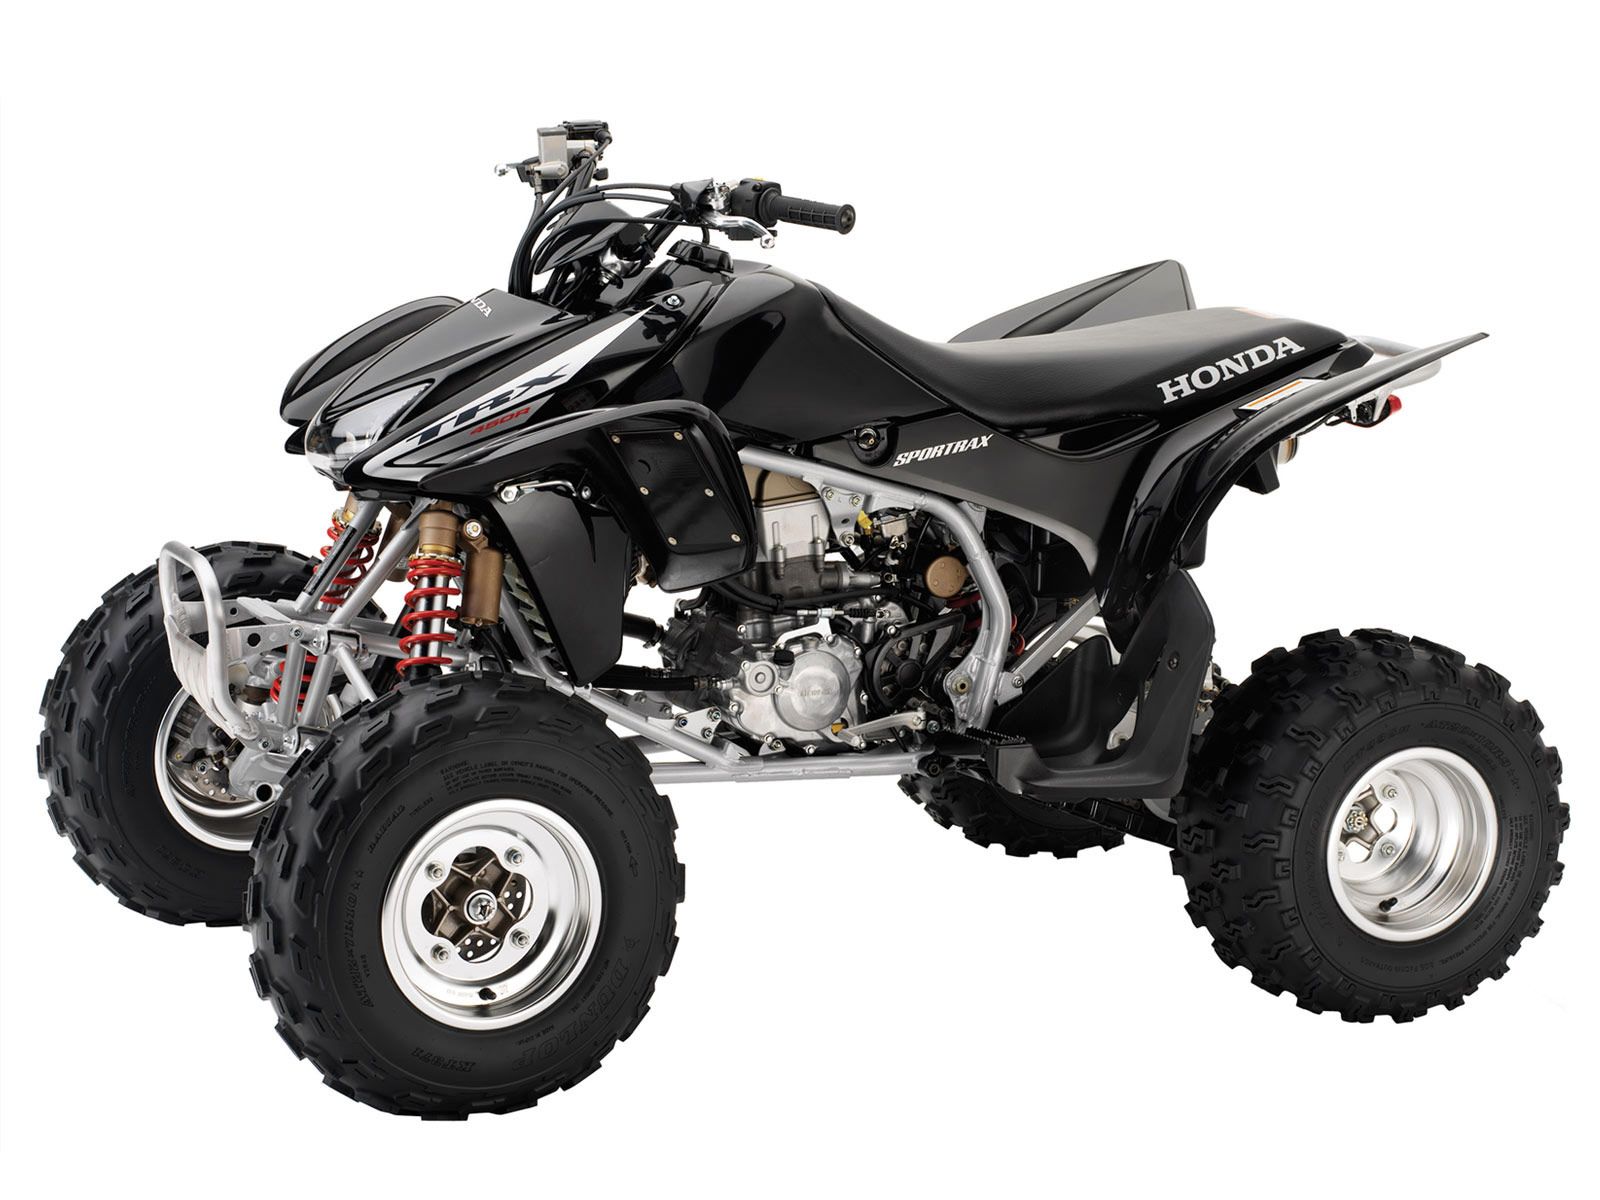 ATV picture, wallpaper, specs, insurance, accident lawyers: HONDA ATV TRX450R picture, specifications. Accident lawyers